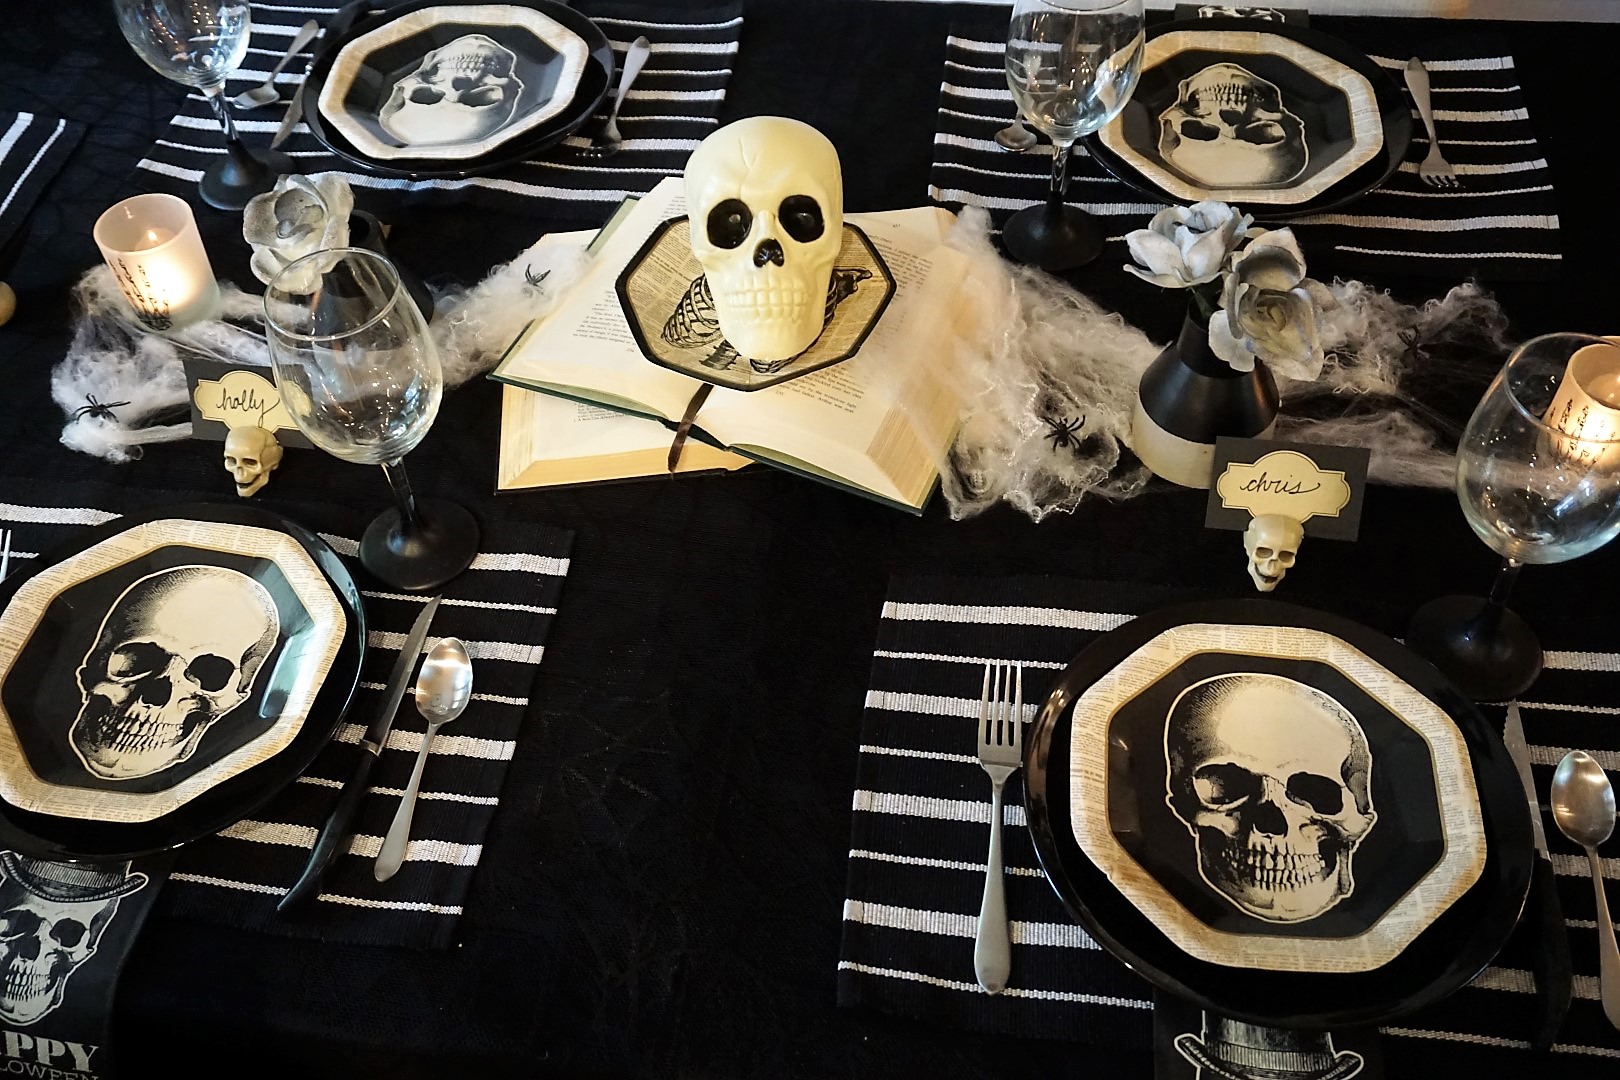  Can you believe many of these items came from Dollar Tree or Goodwill? Learn how to make the most out of your budget when creating a Halloween Table. | Legally Crafty #halloweendiy #halloweentable #halloweentablescape #halloweendiy 